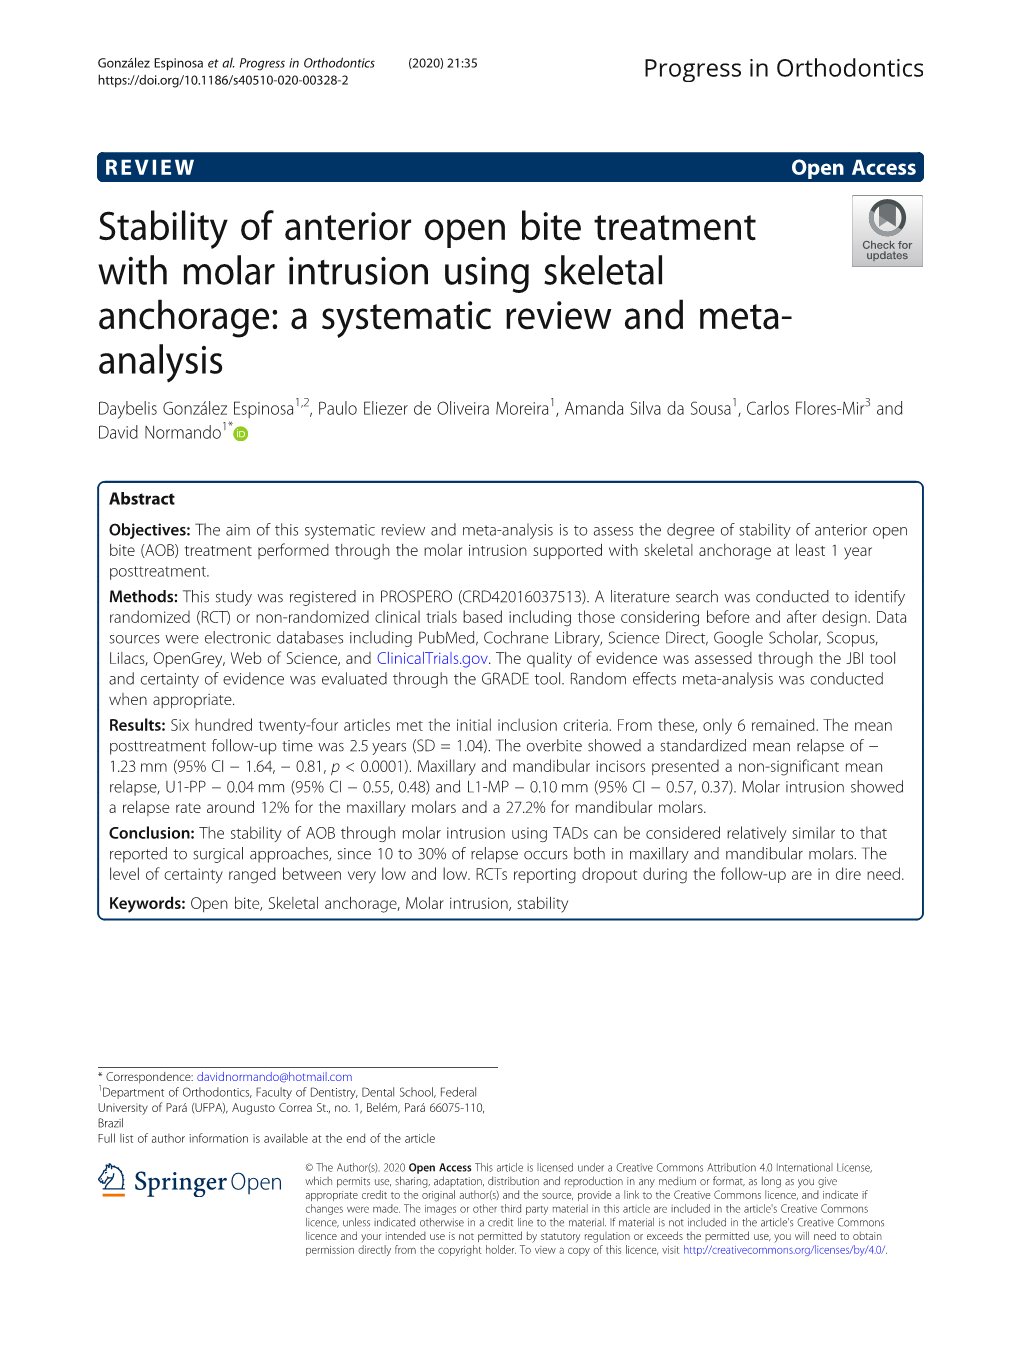 Stability of Anterior Open Bite Treatment with Molar Intrusion Using Skeletal